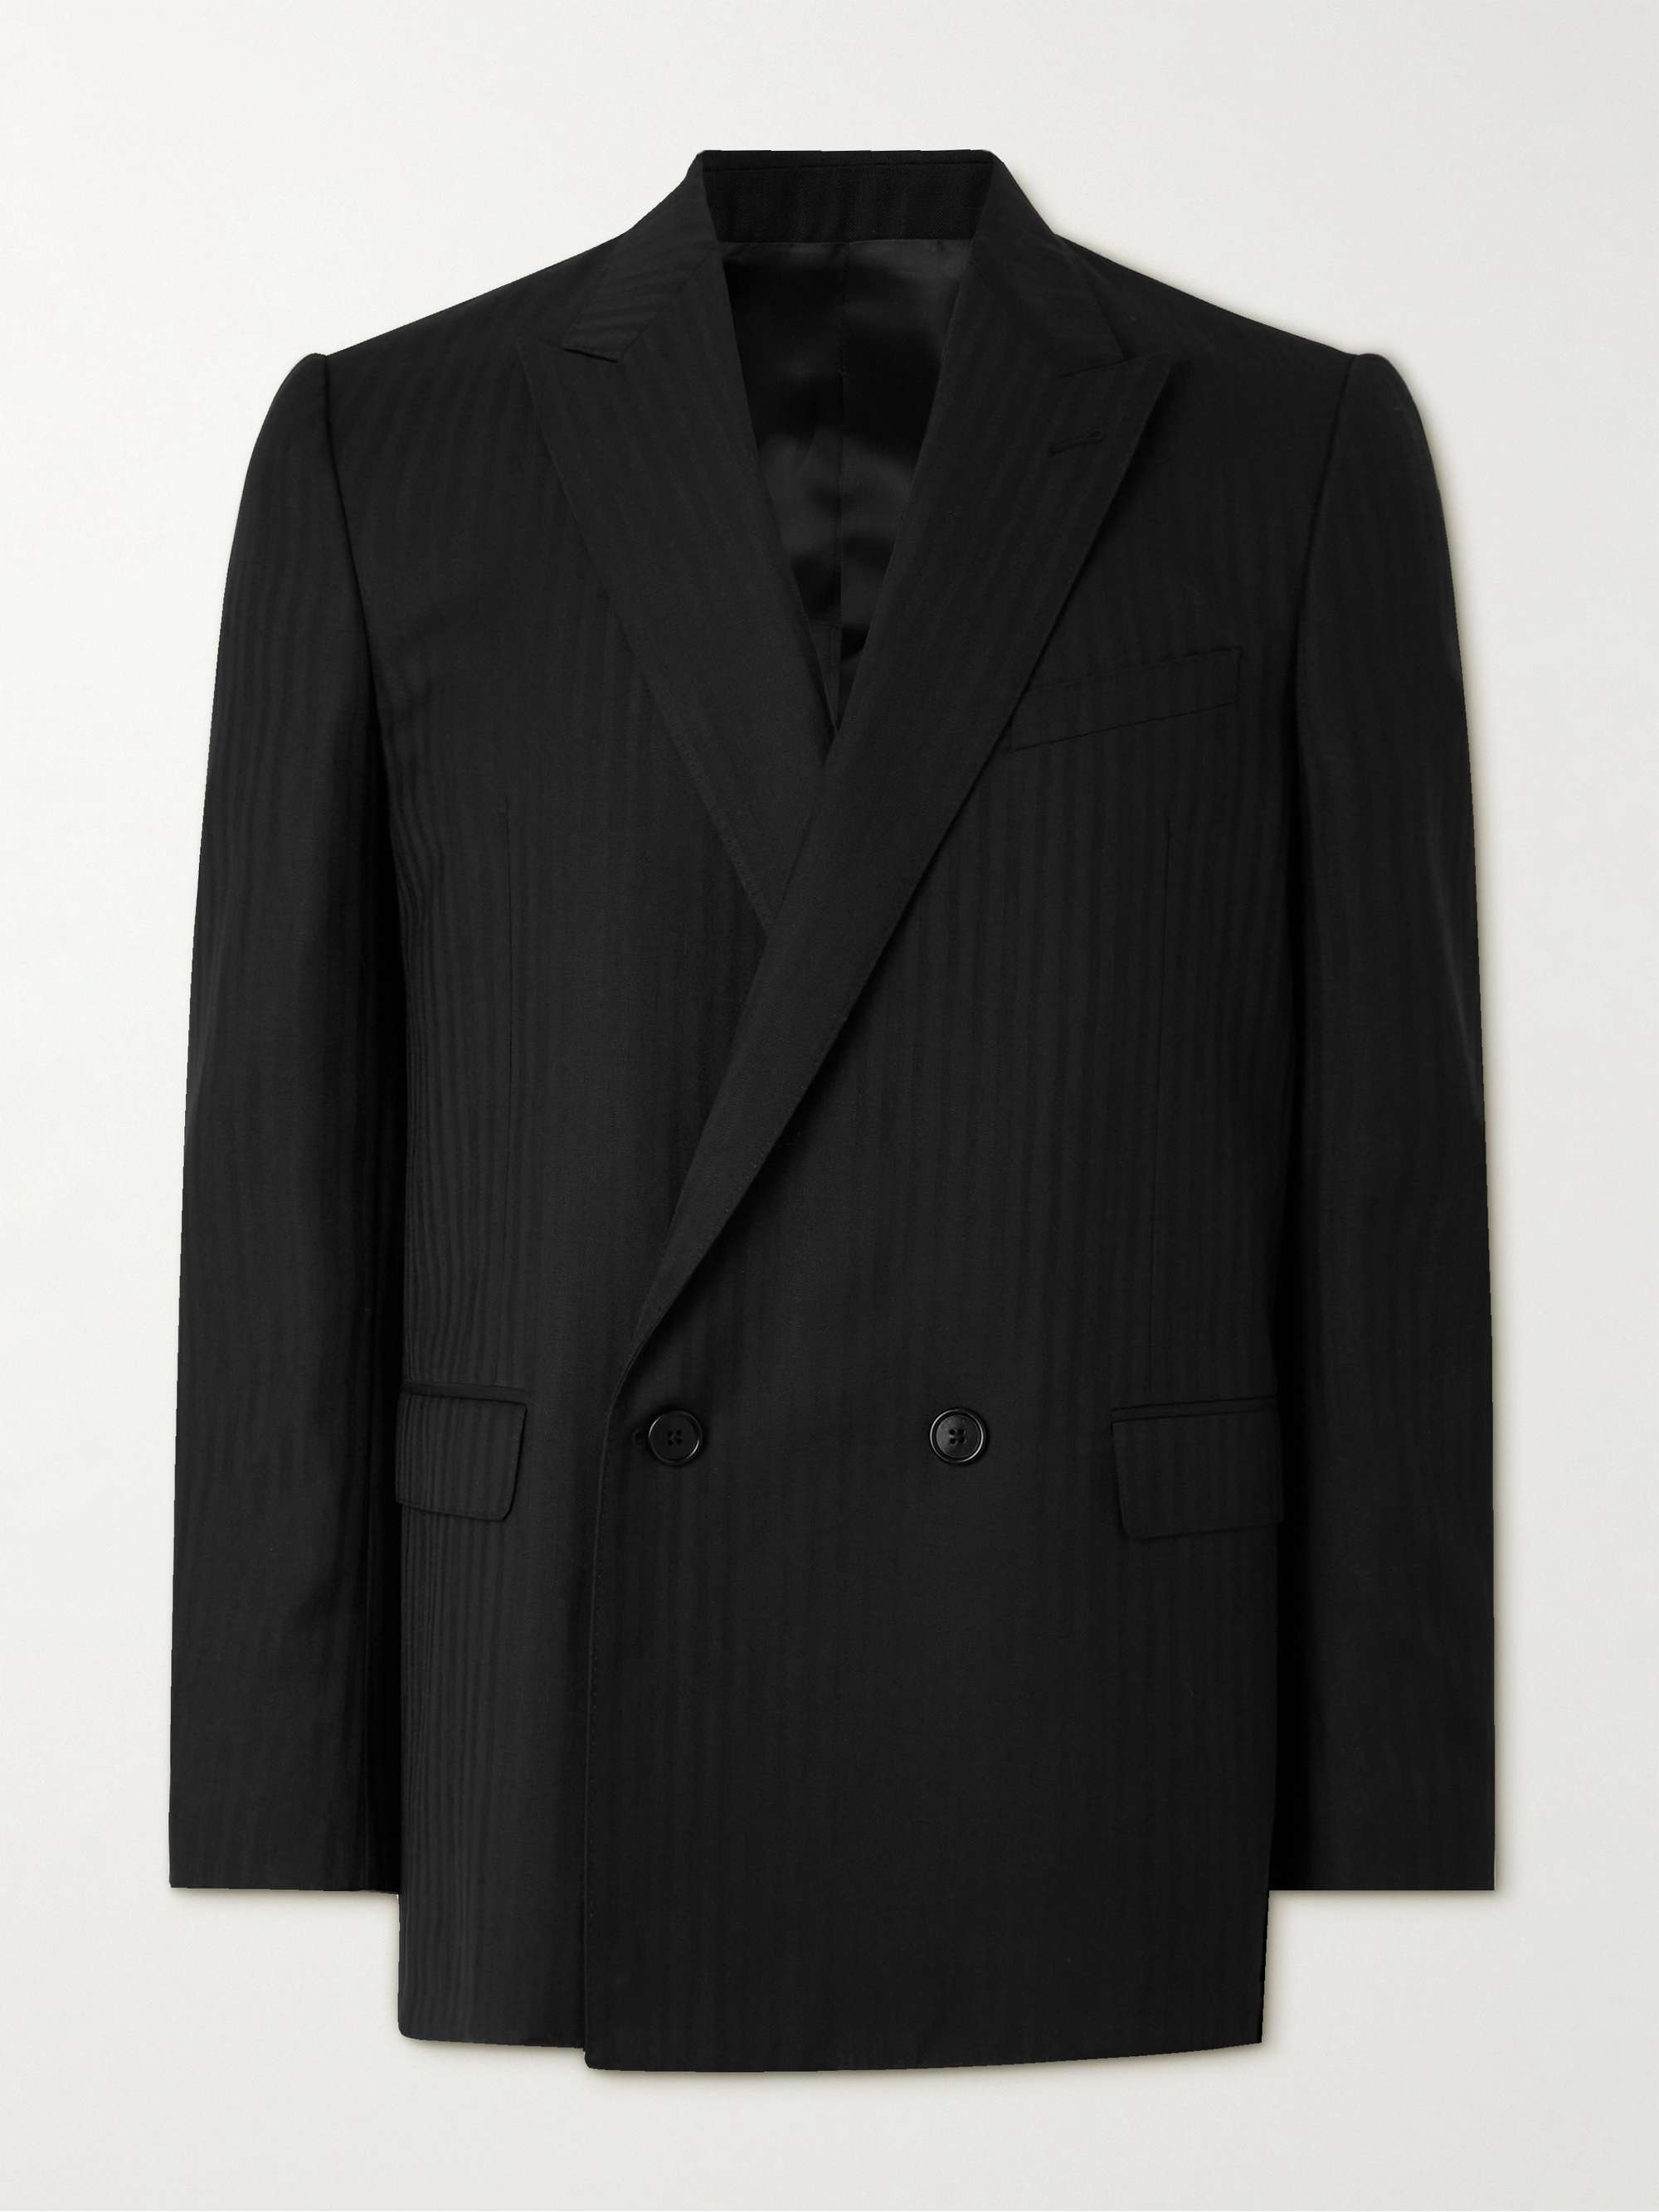 CELINE HOMME Double-Breasted Striped Wool and Mohair-Blend Blazer